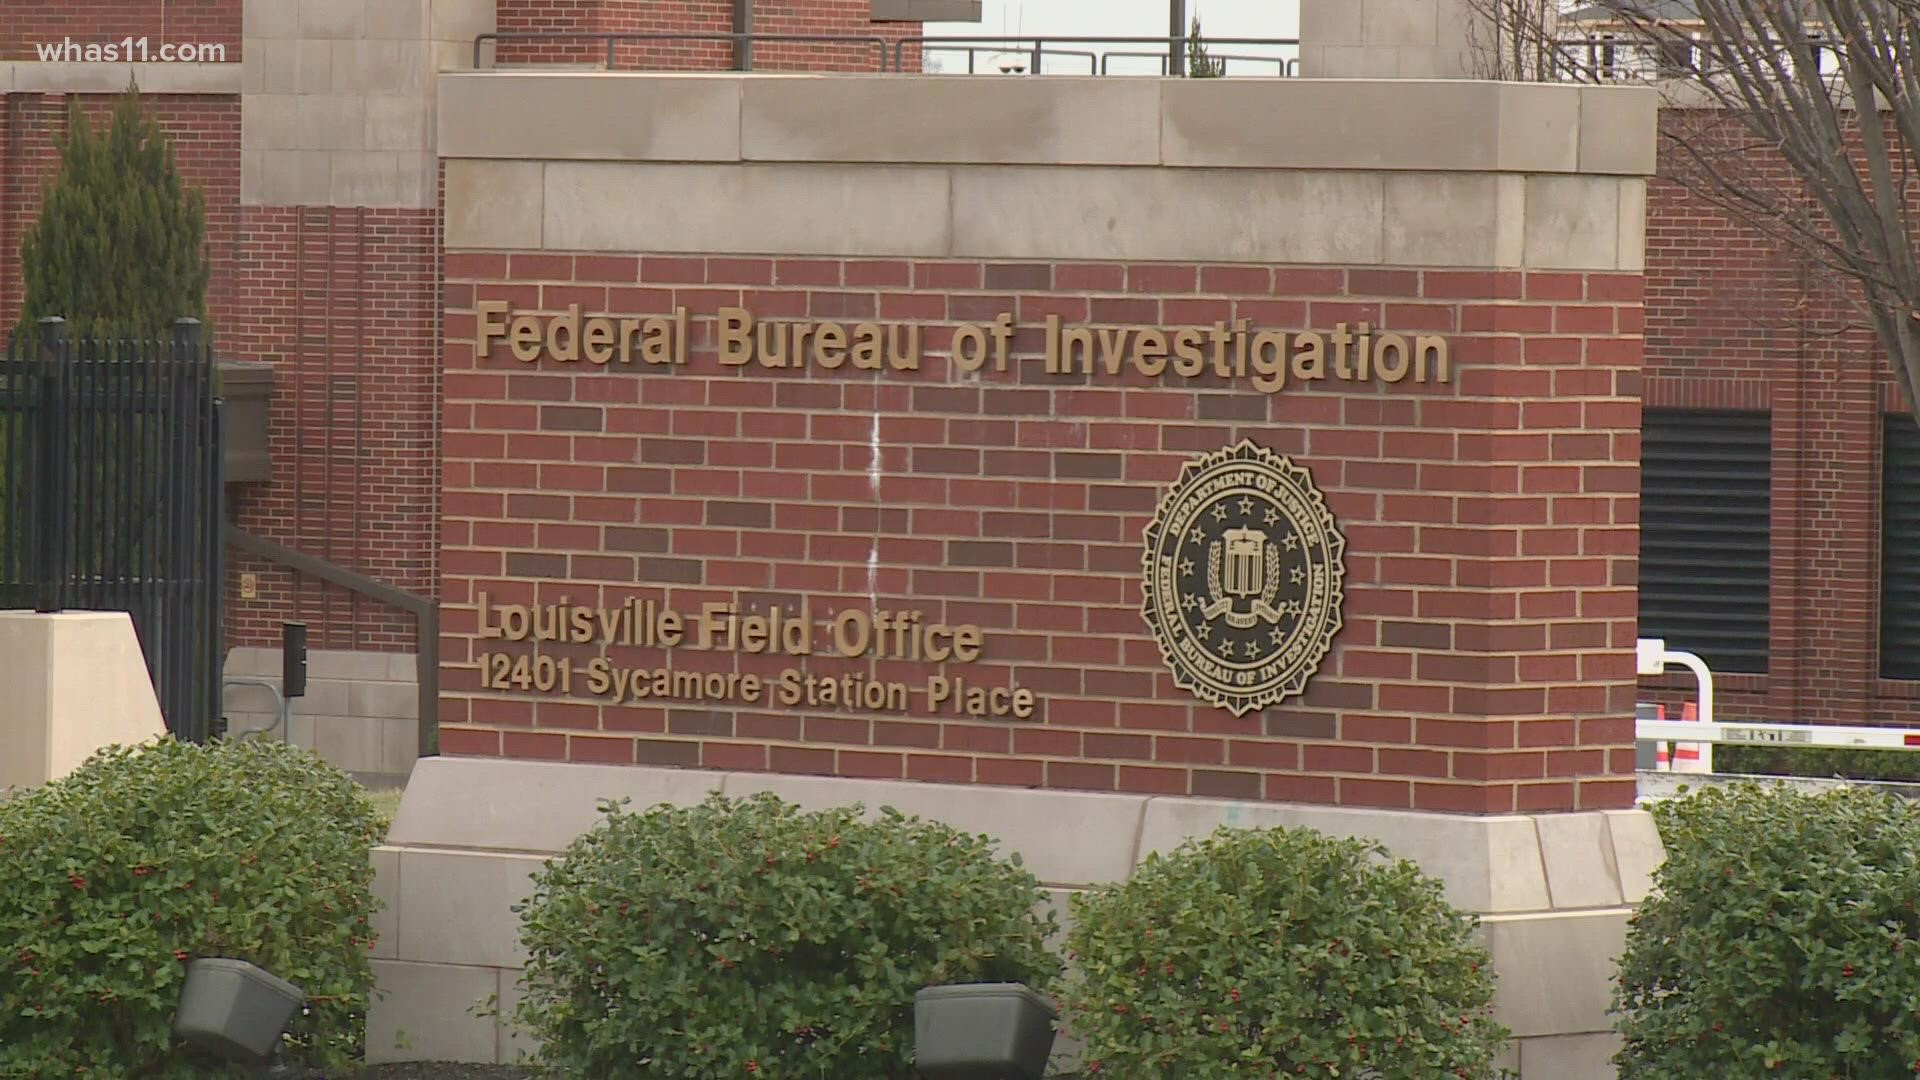 The FBI Special Agents will help identify, apprehend -- and aid in convicting individuals involved in violent crime around the city.